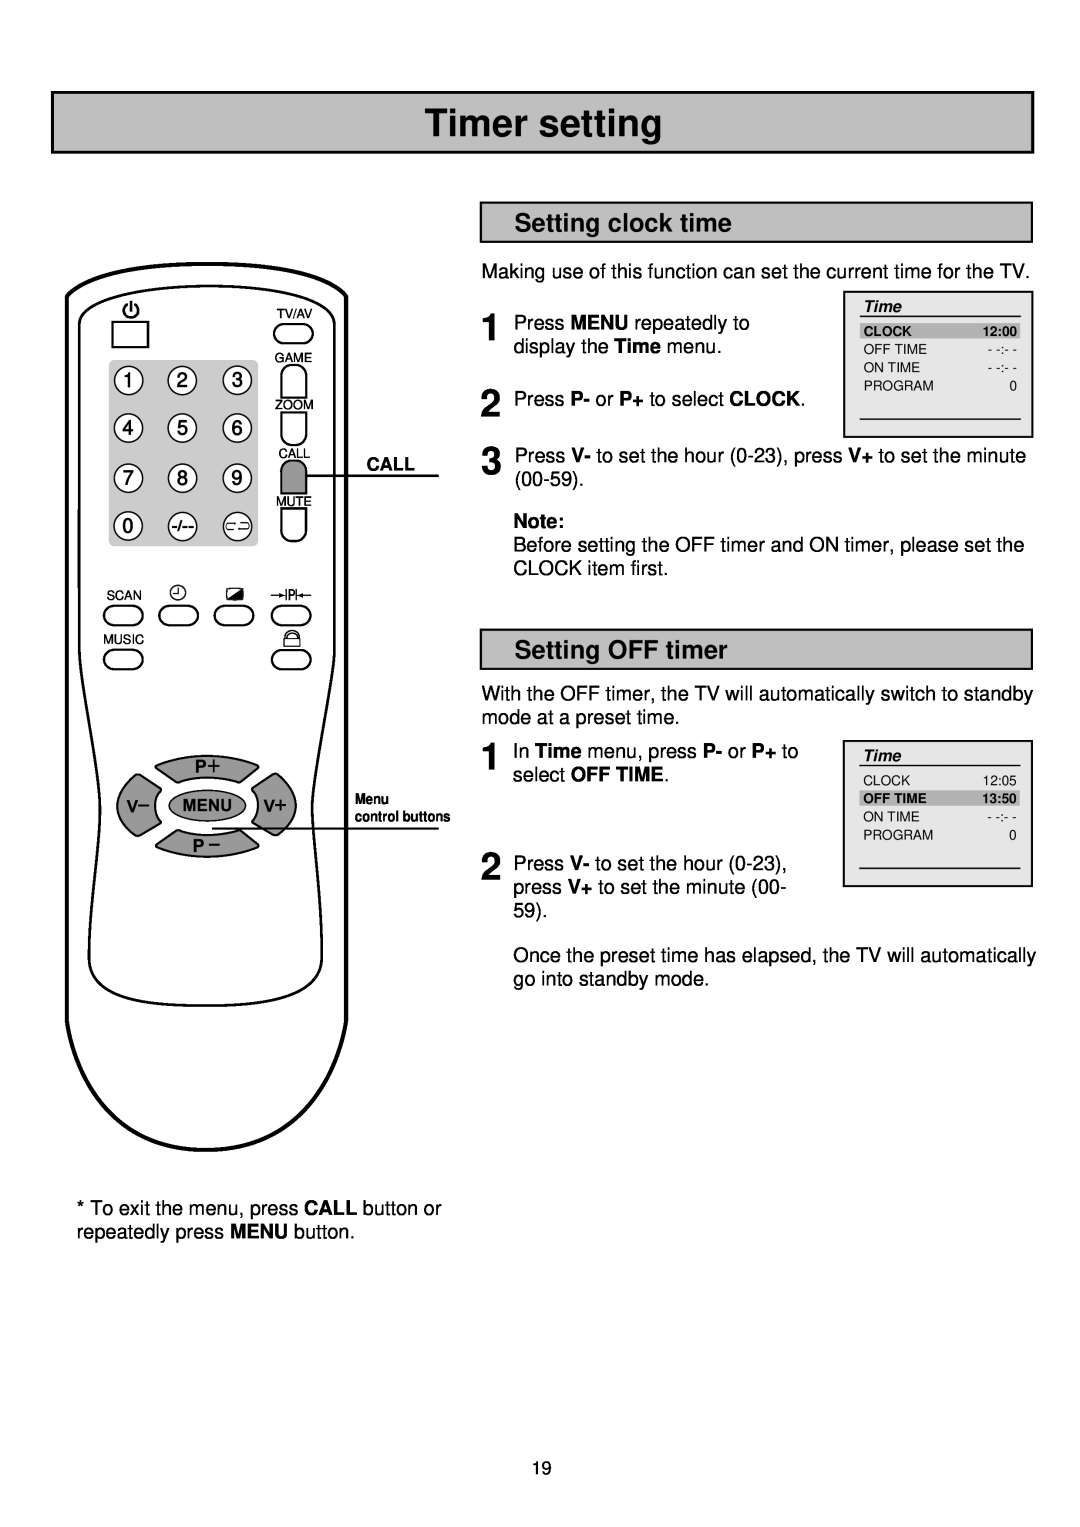 Palsonic 6835TK owner manual Timer setting, Setting clock time, Setting OFF timer 